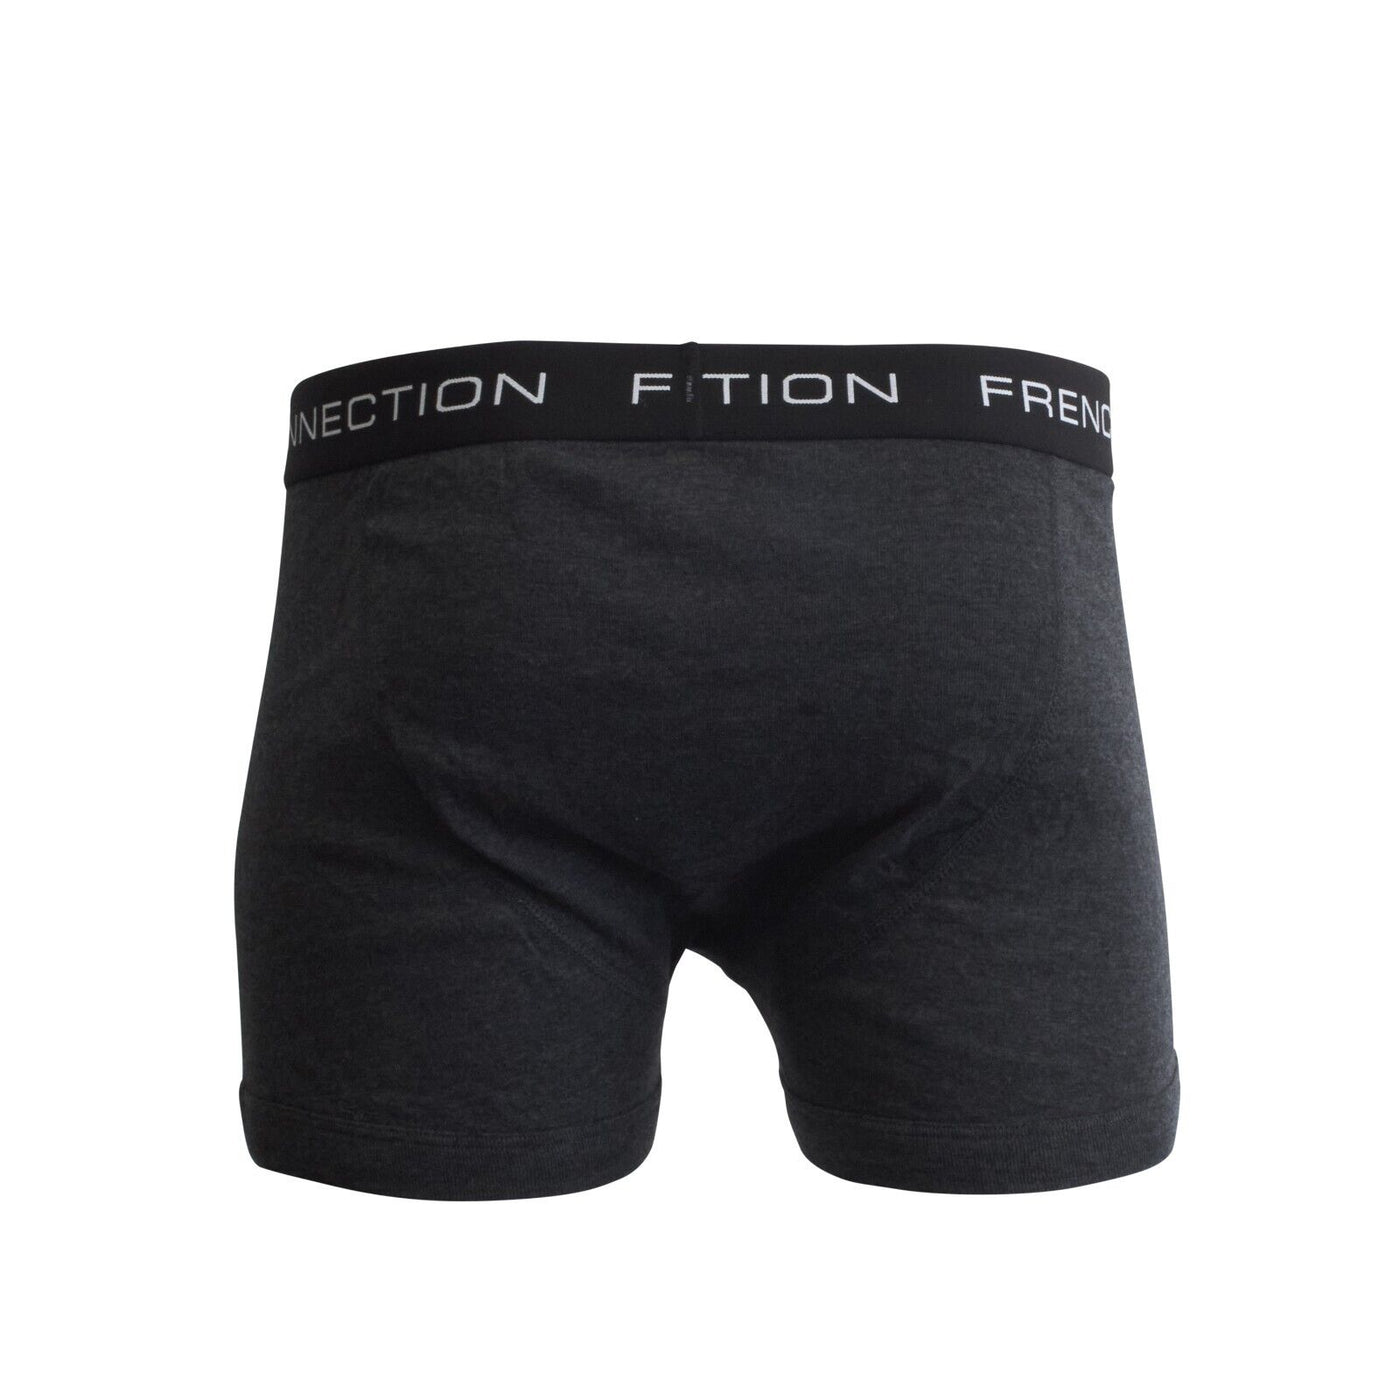 FCUK Men's HTH Charcoal & HTH Navy 2 Pack Boxer Briefs